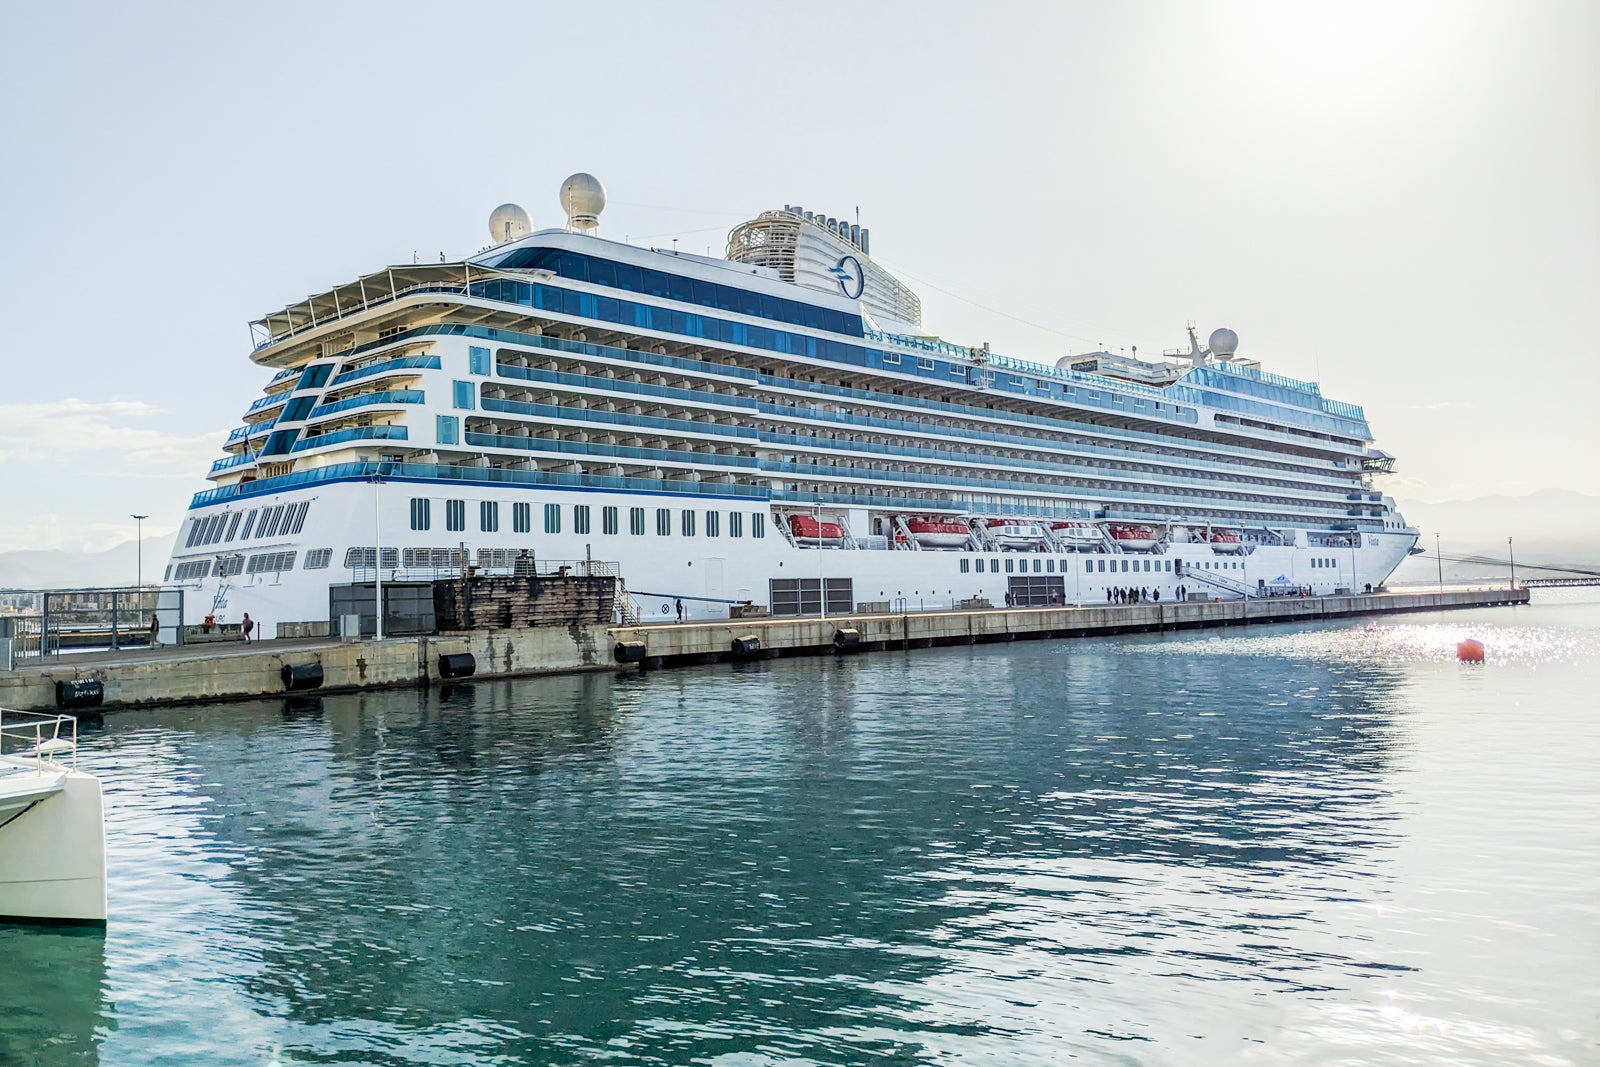 Vista cruise ship review: What to expect on Oceania’s first Allura-class ship